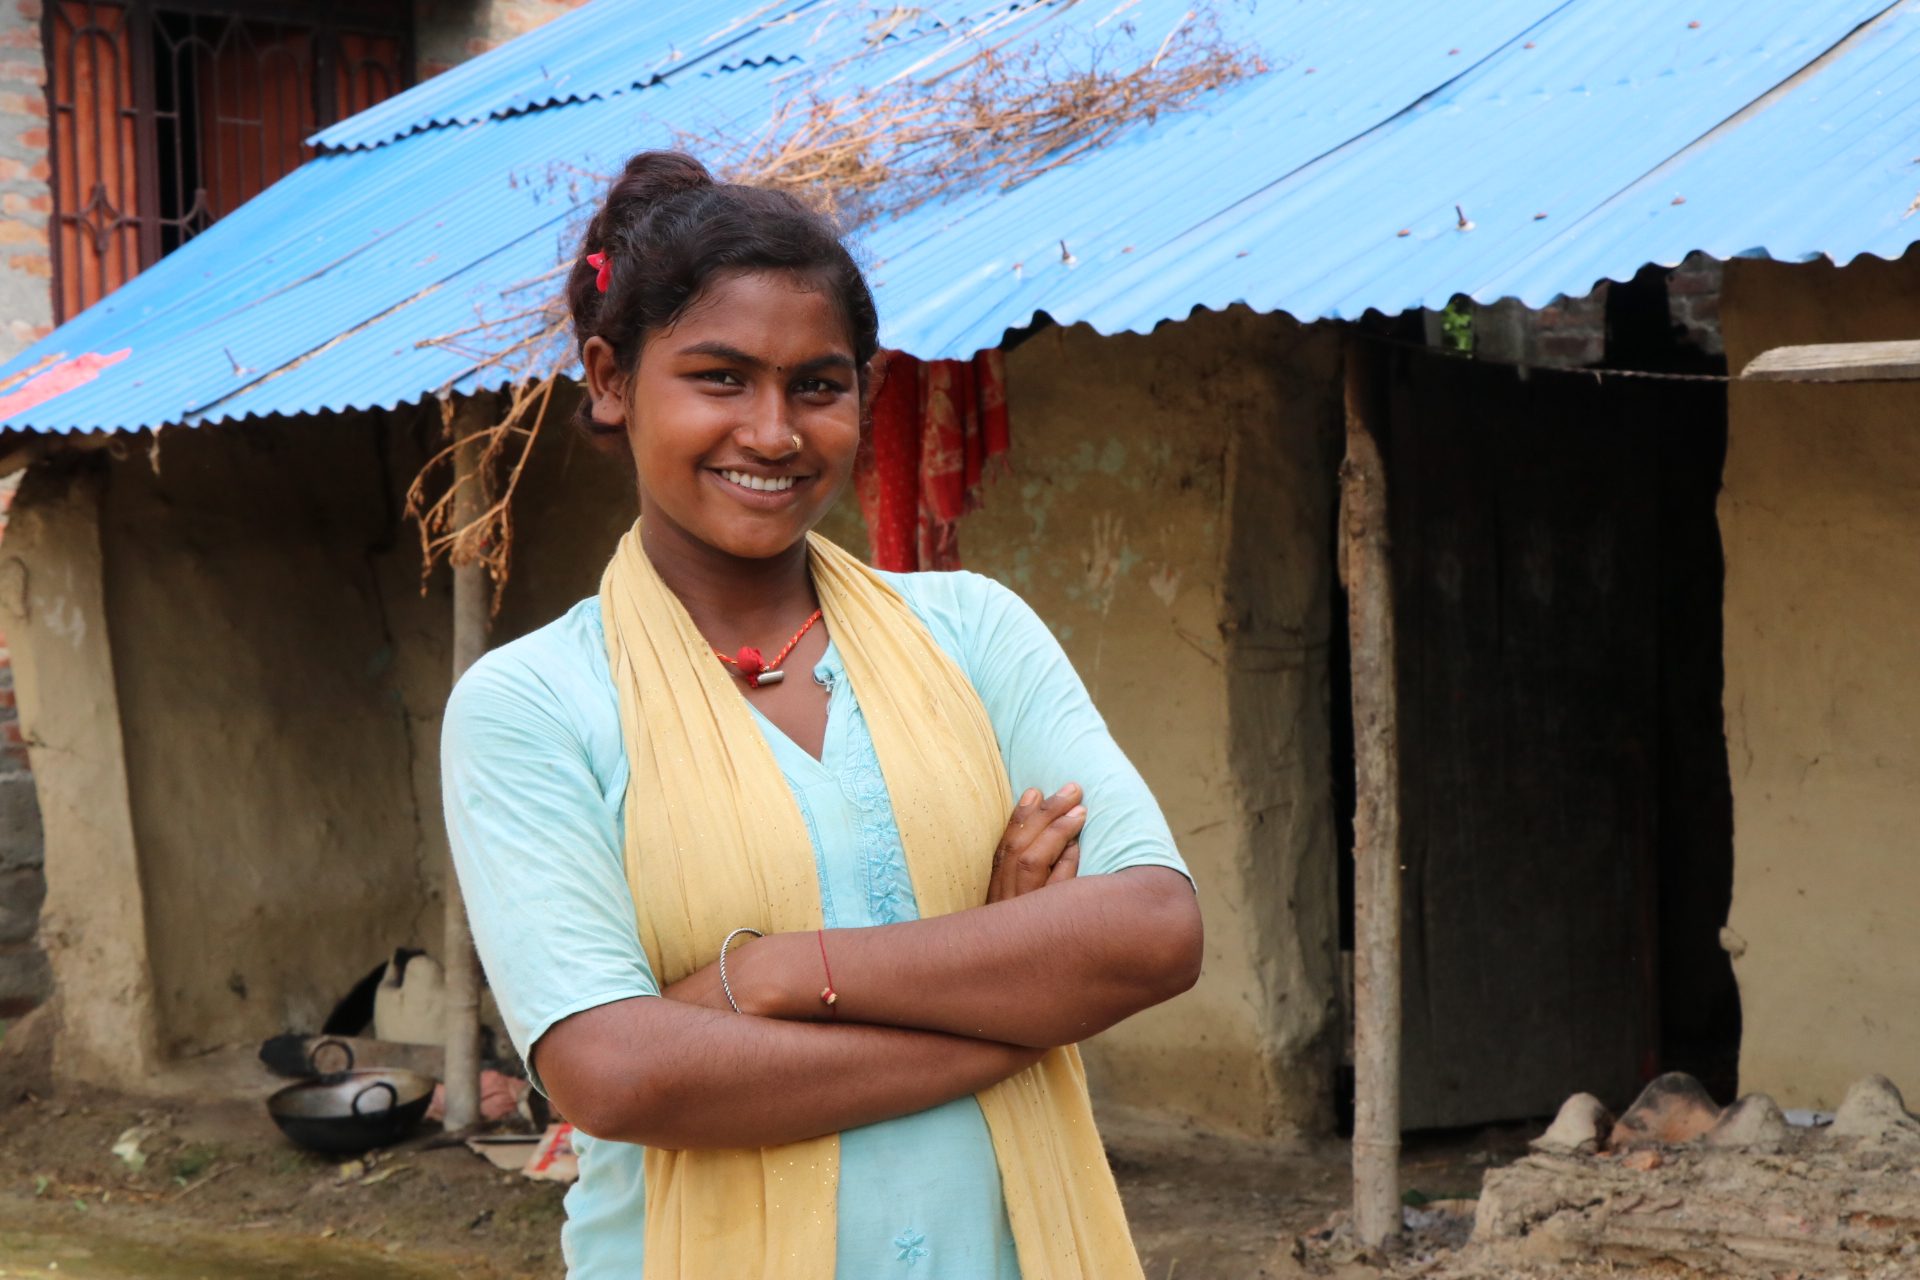 Prativa standing in front of her house with her arms folded, smiling.